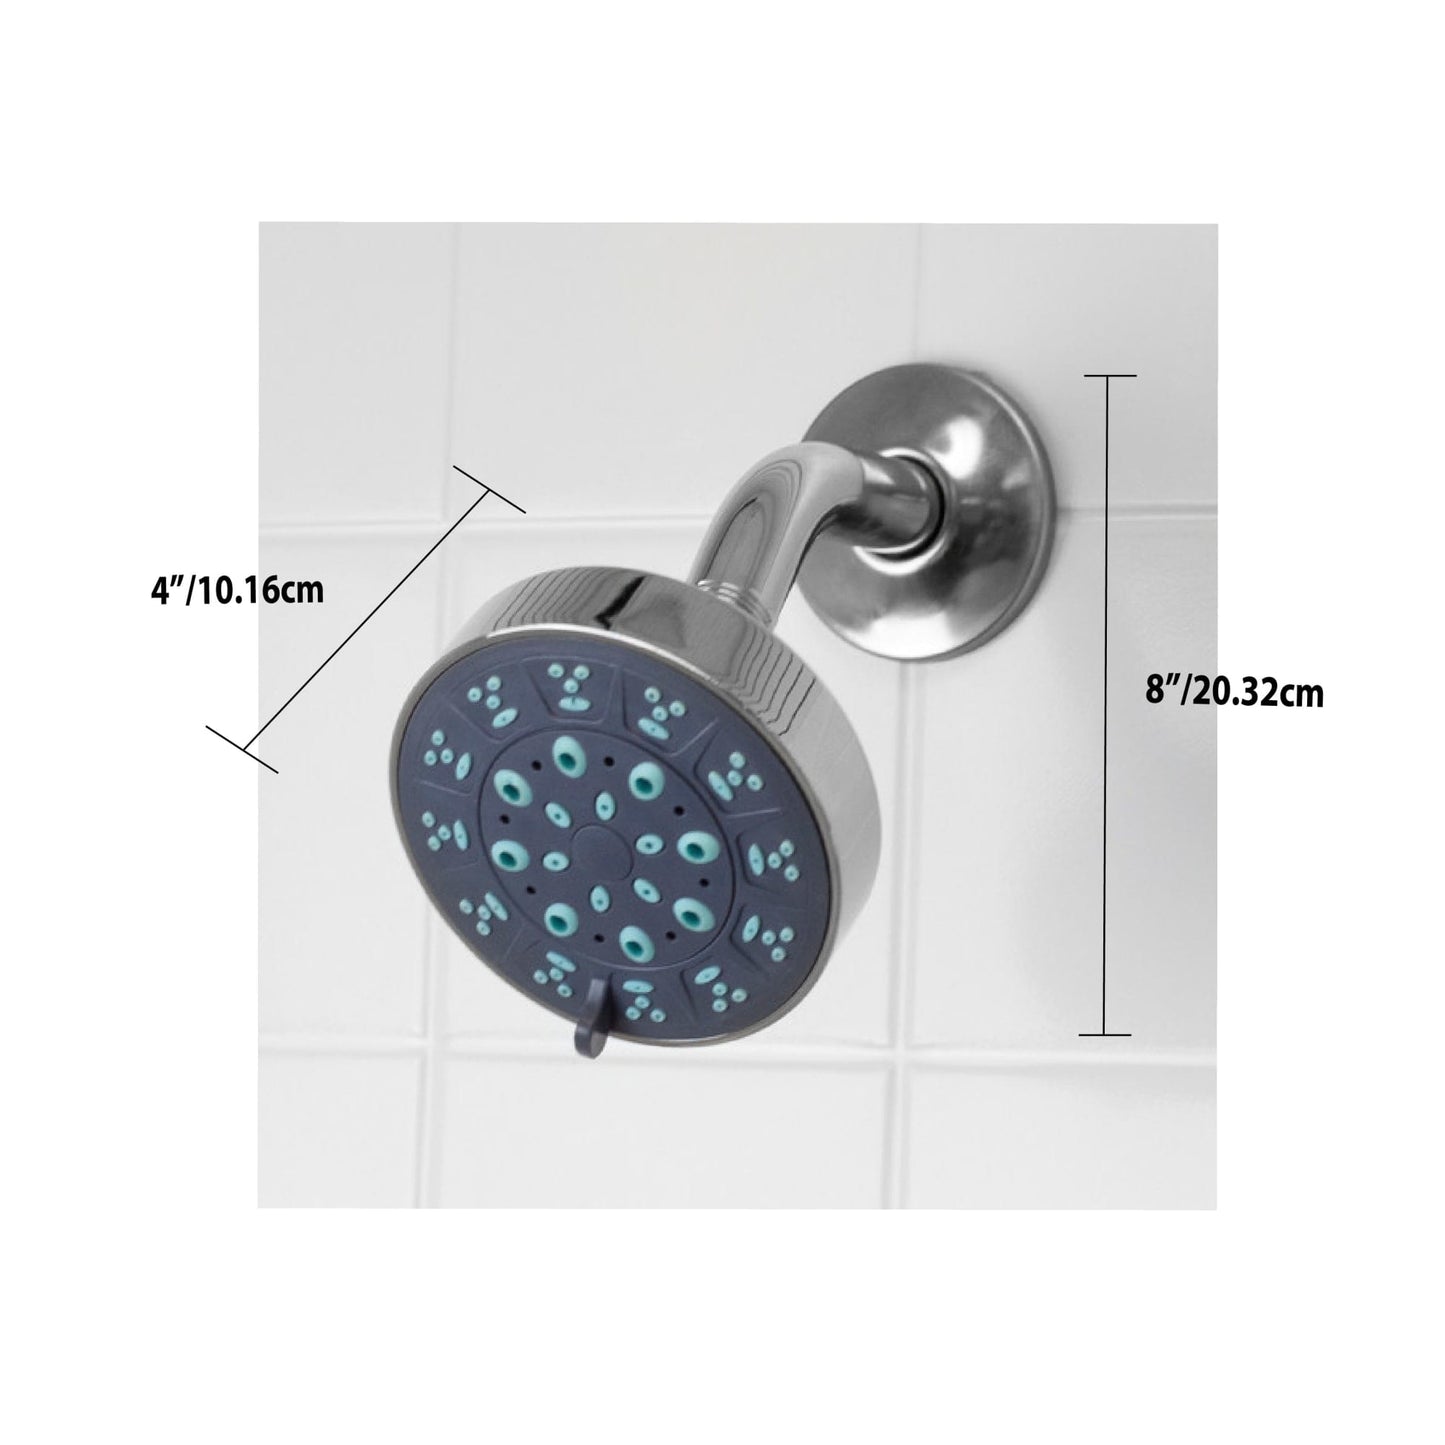 Pure Paradise 3.75 in. Fixed Shower Head 5 Function Shower Massager, Chrome